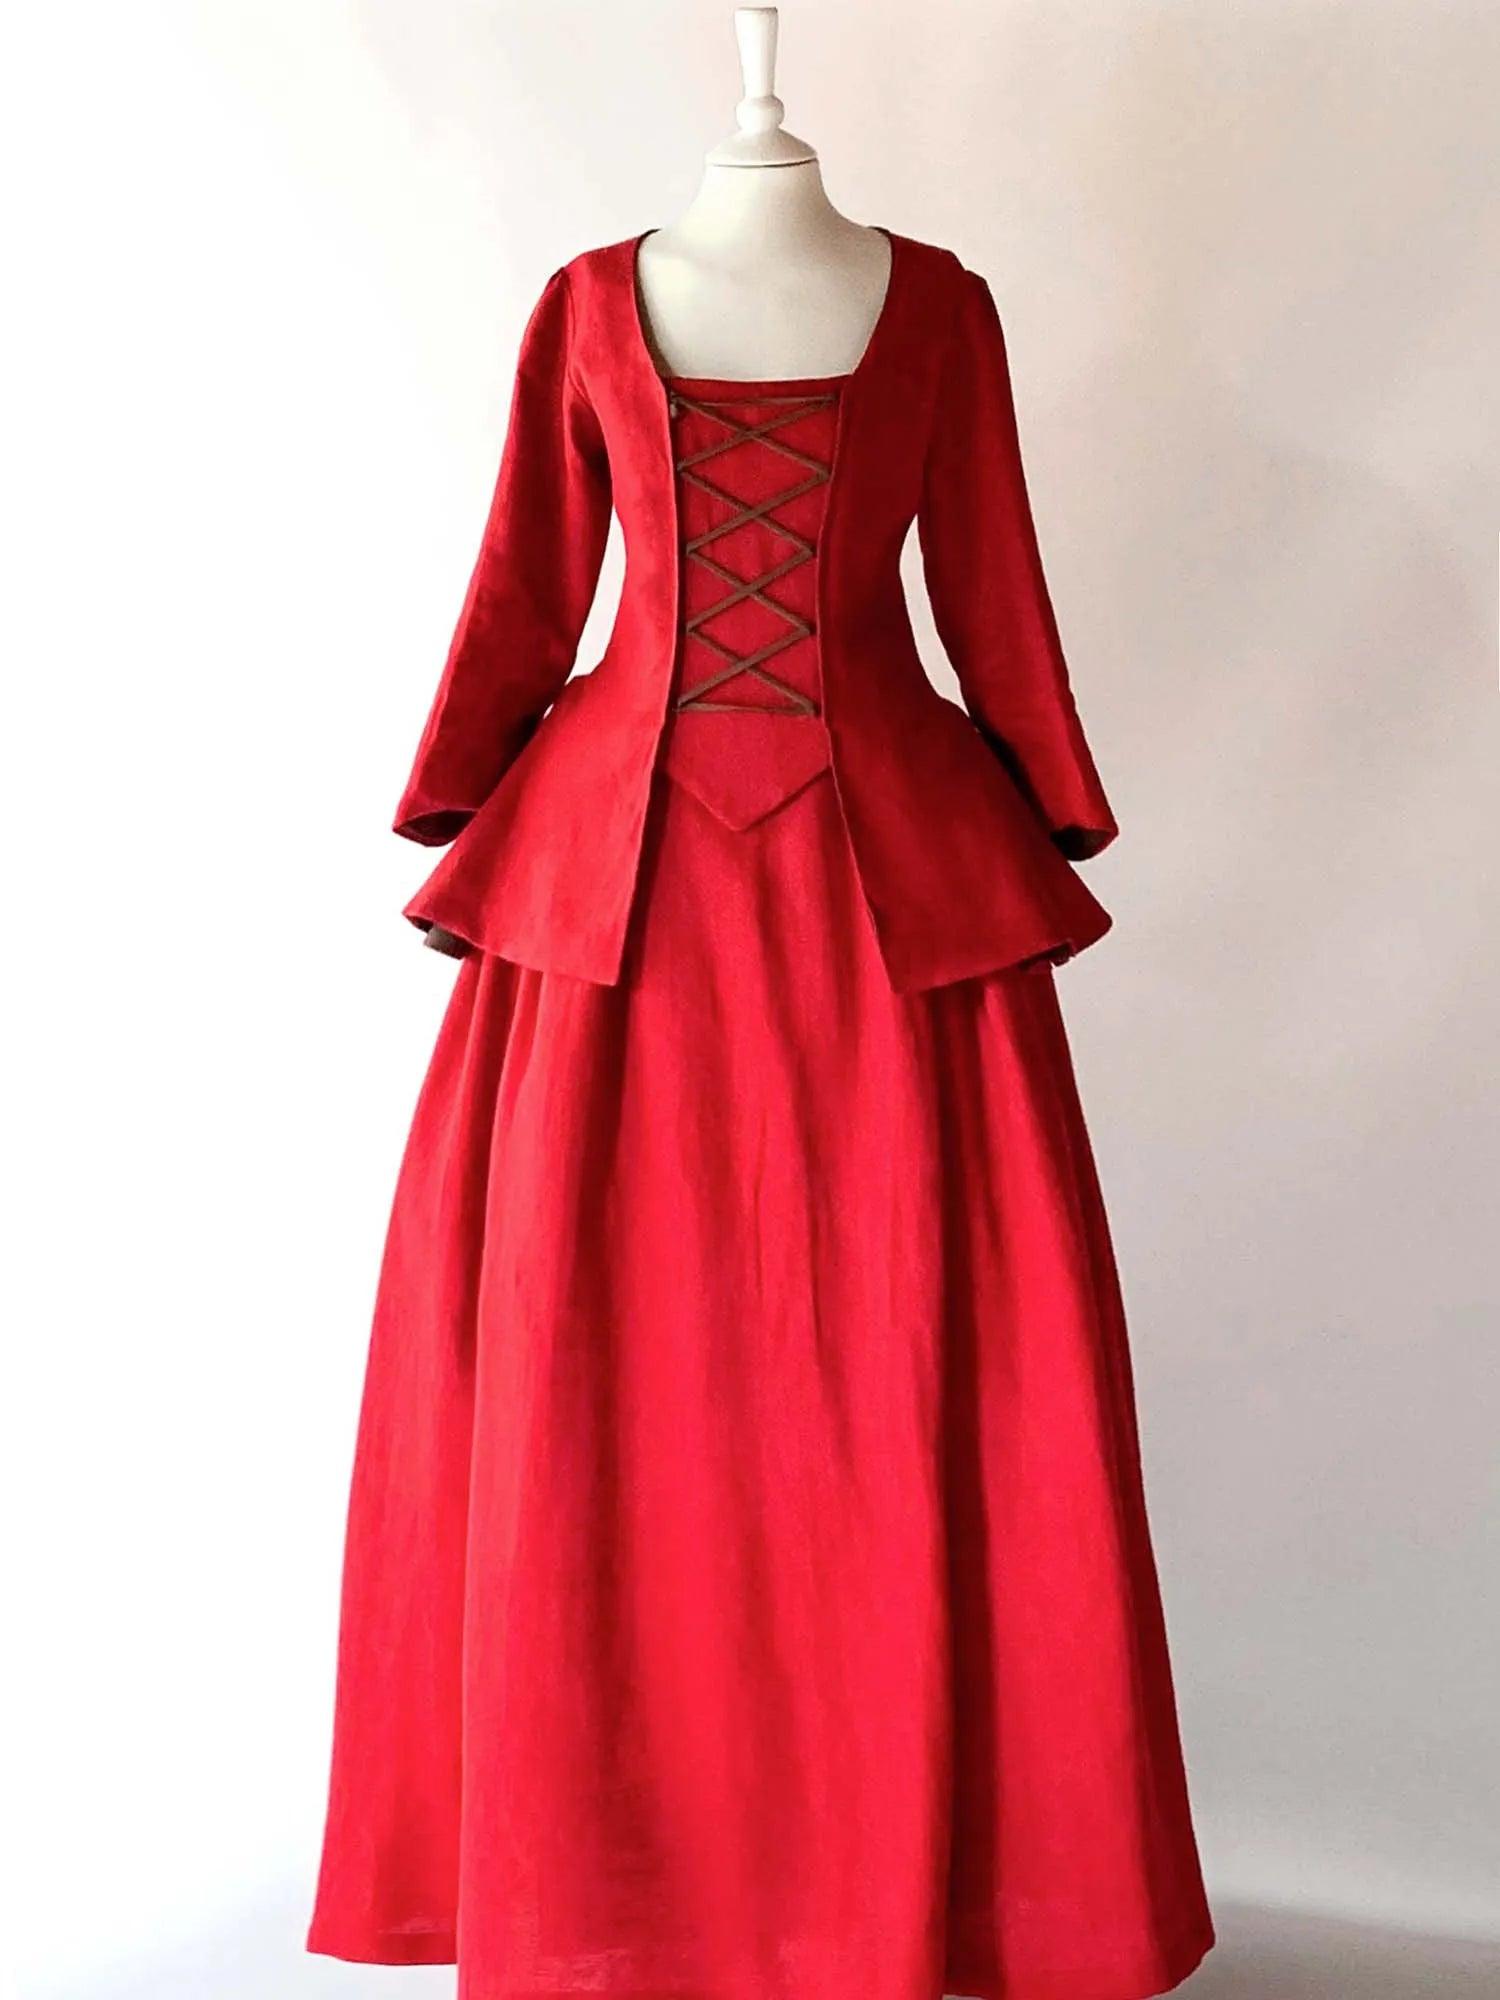 JANET, Colonial Costume in Cherry Red Linen - Atelier Serraspina